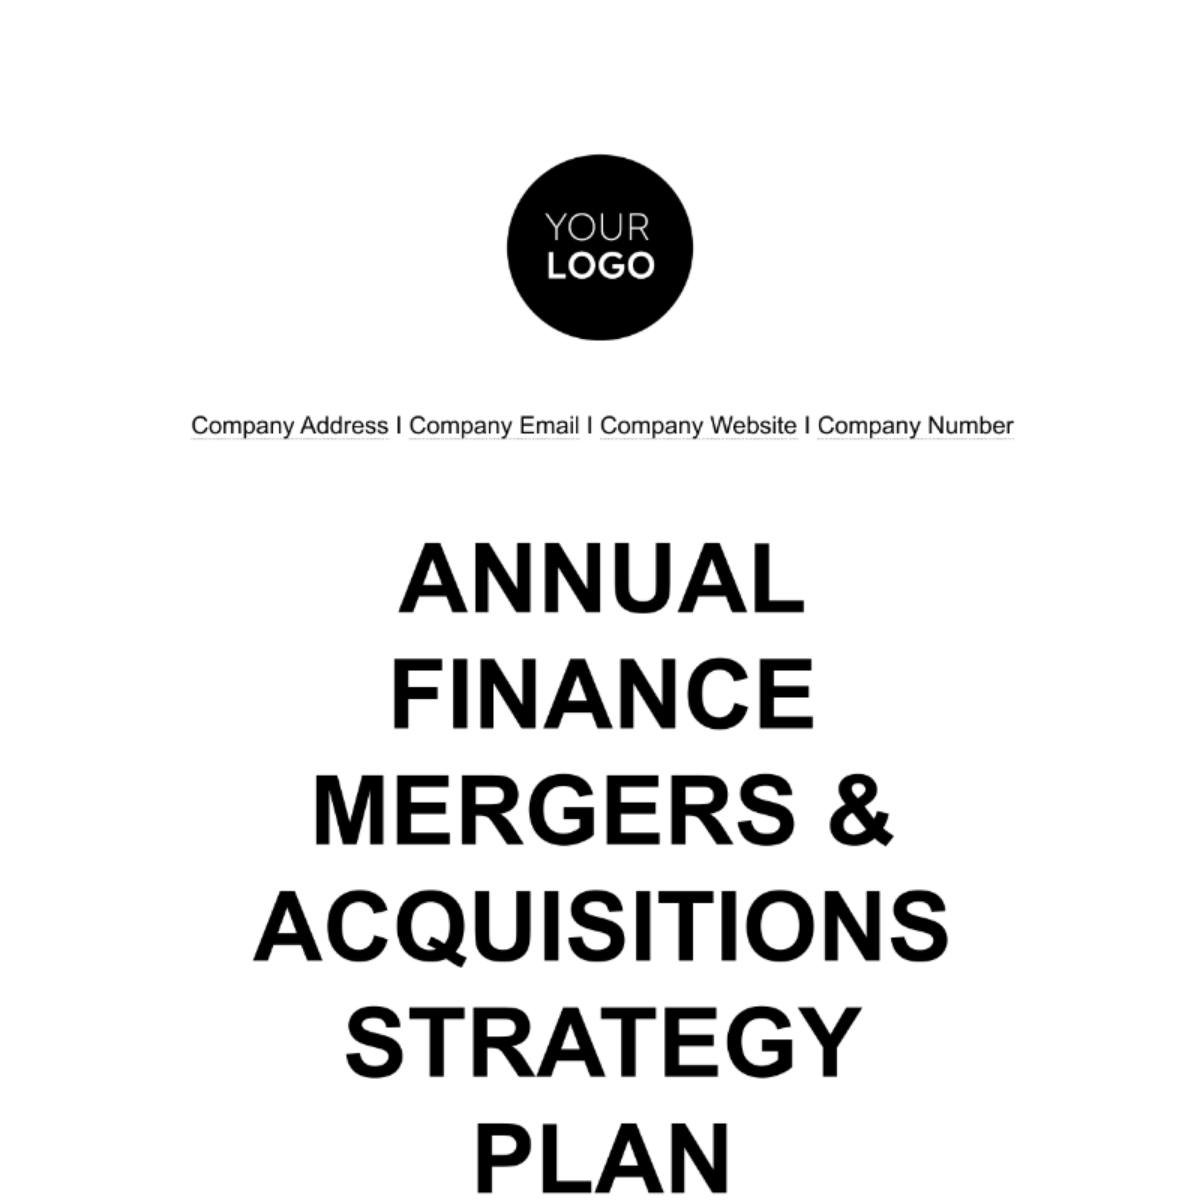 Free Annual Finance Mergers & Acquisitions Strategy Plan Template